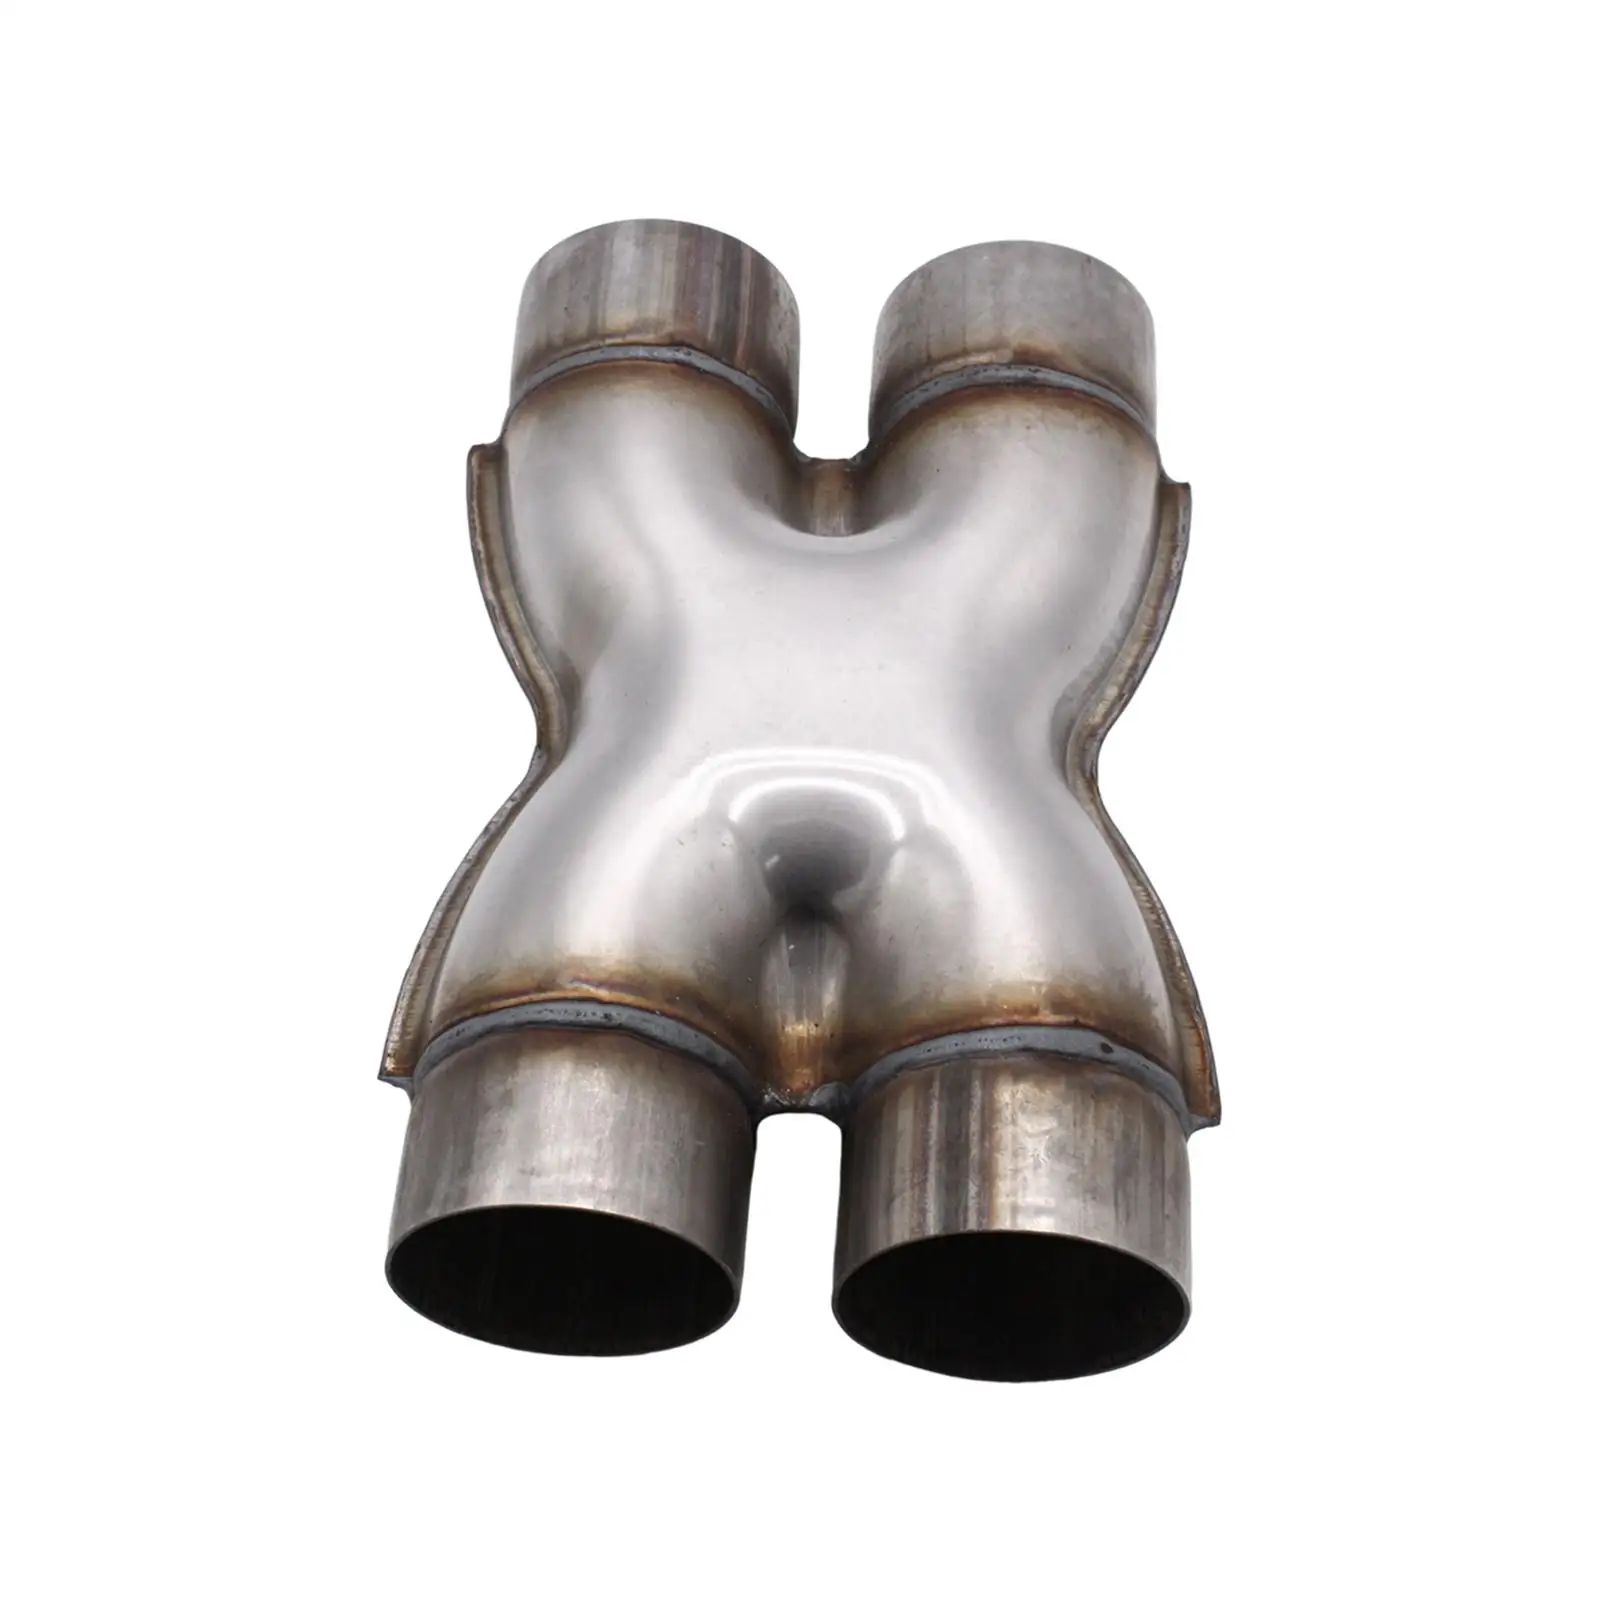 Stainless Steel Exhaust Tip Accessory Professional Automobile Parts Easy to Install Assembly Durable Universal Crossover x Pipe